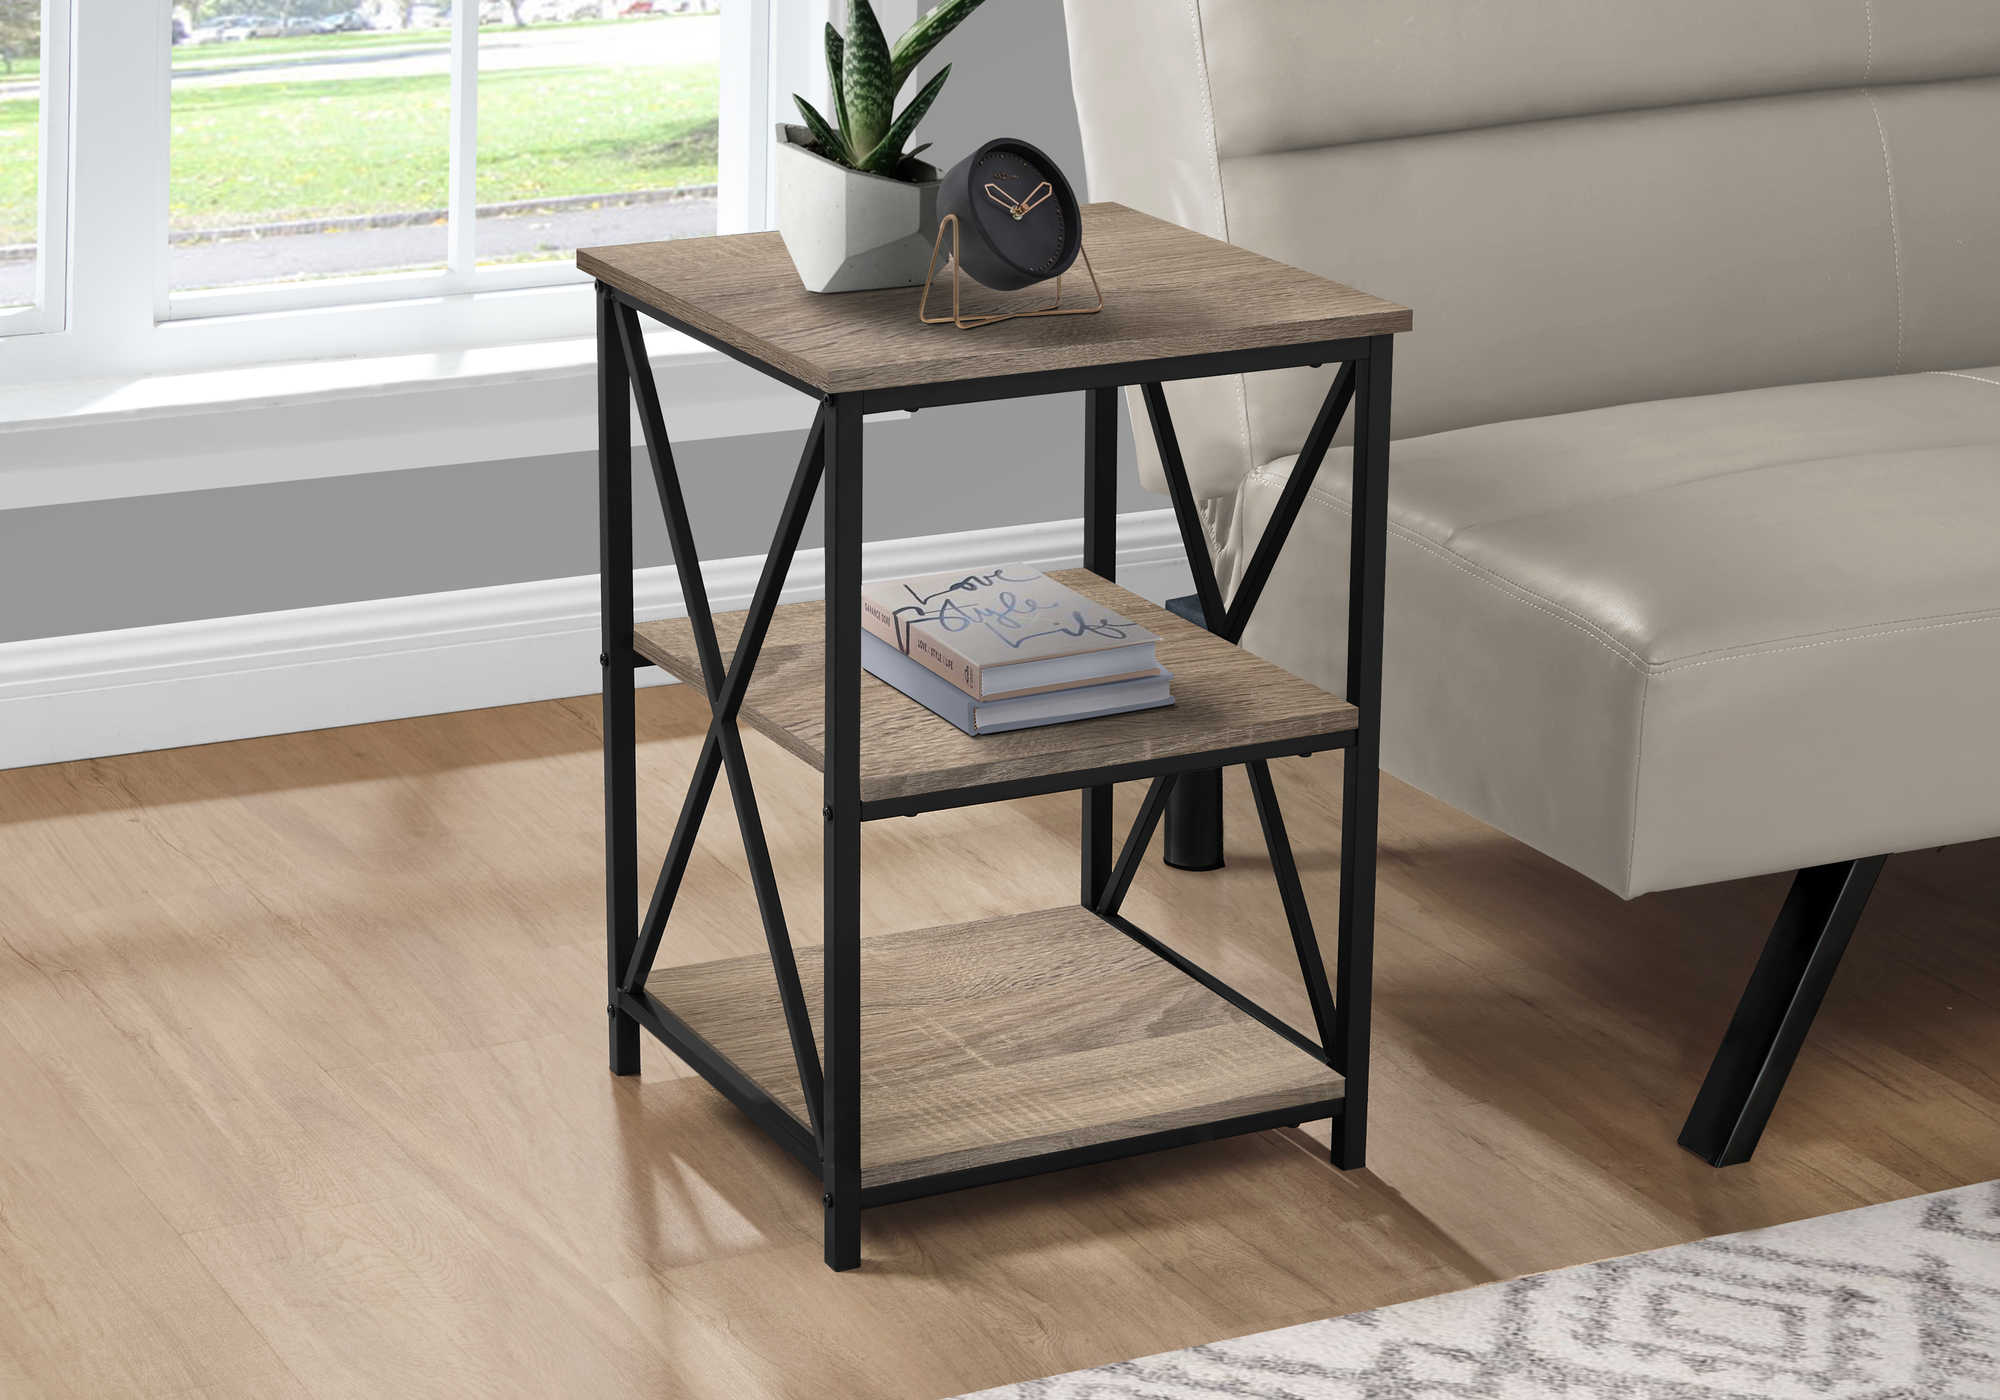 ACCENT TABLE - 26"H / DARK TAUPE / BLACK METAL